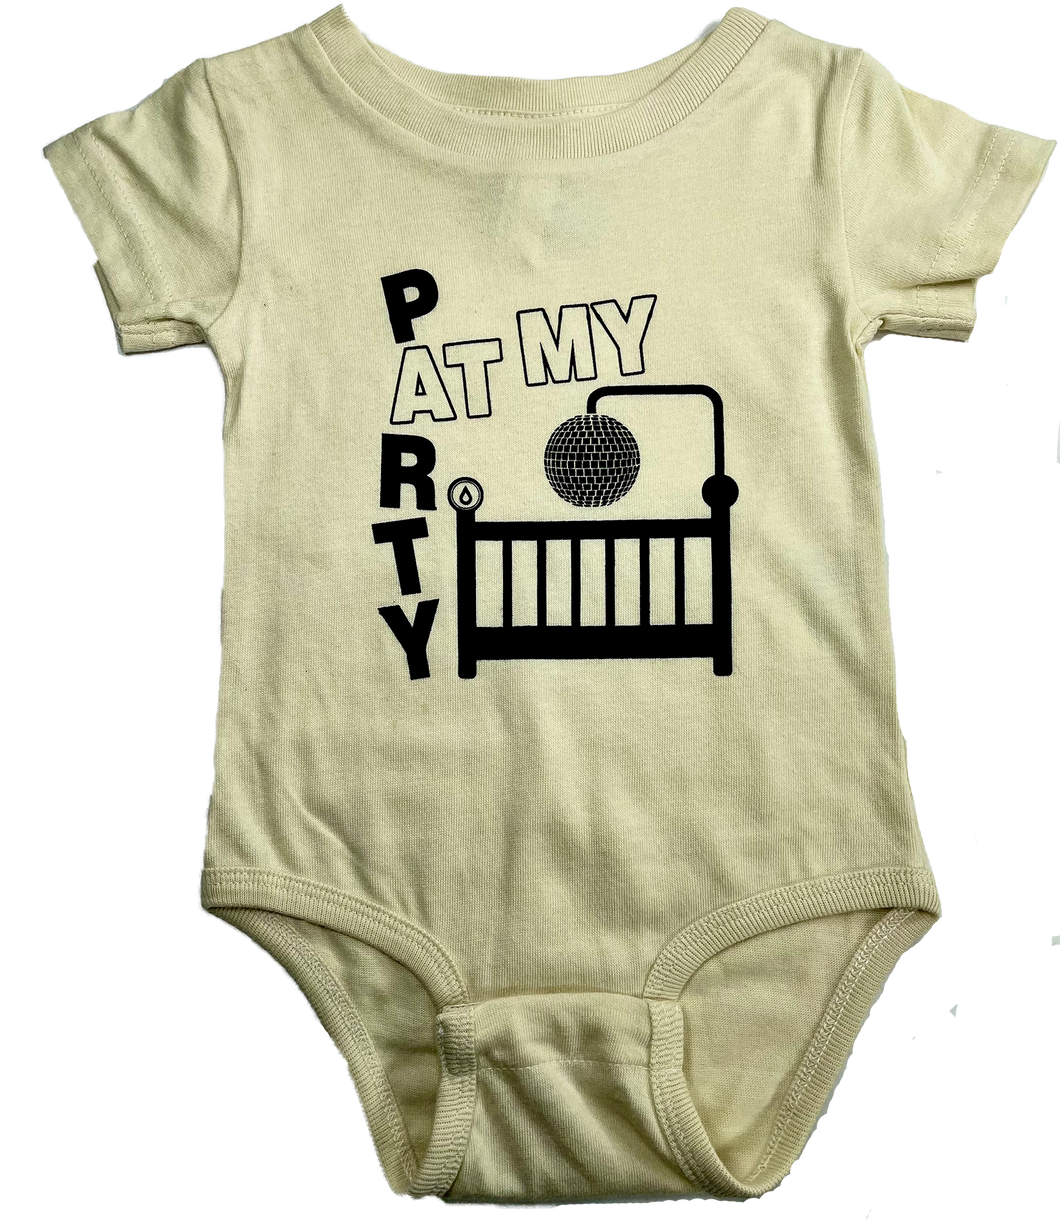 DDP Baby Onesie - Party At My Crib!